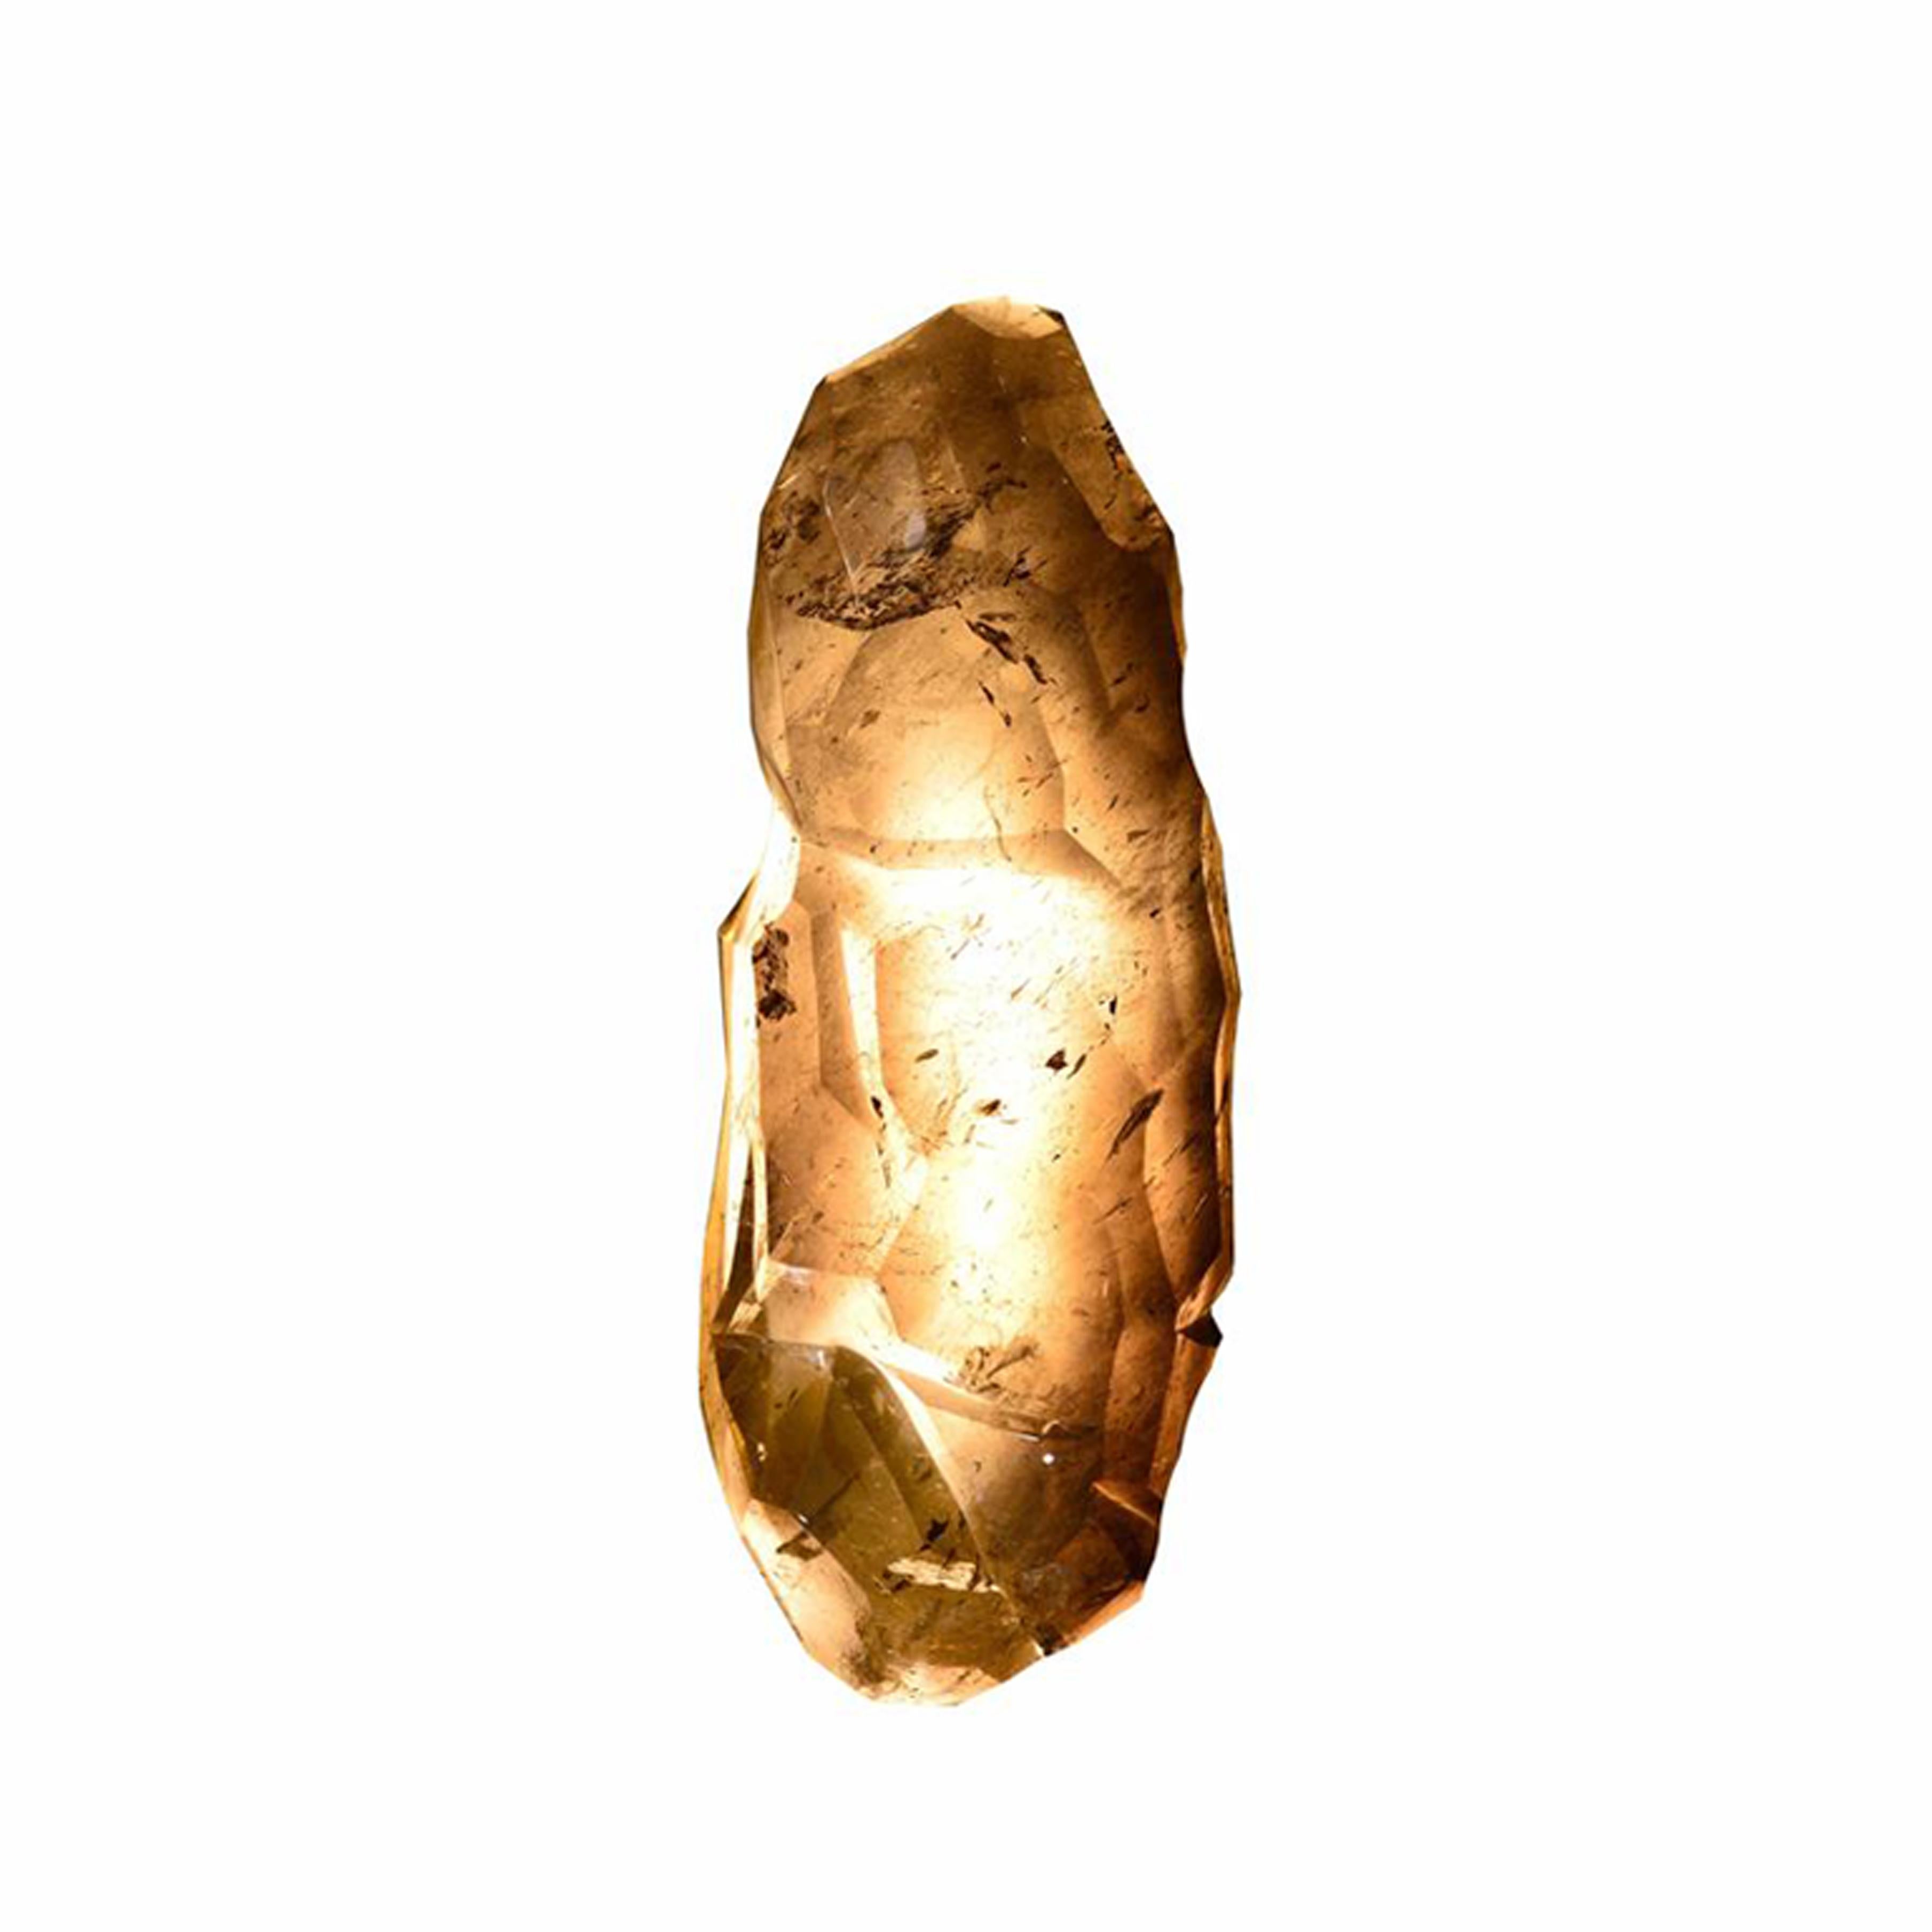 An Abstract Form Smoky Brown Rock Crystal Quartz Wall Sconce